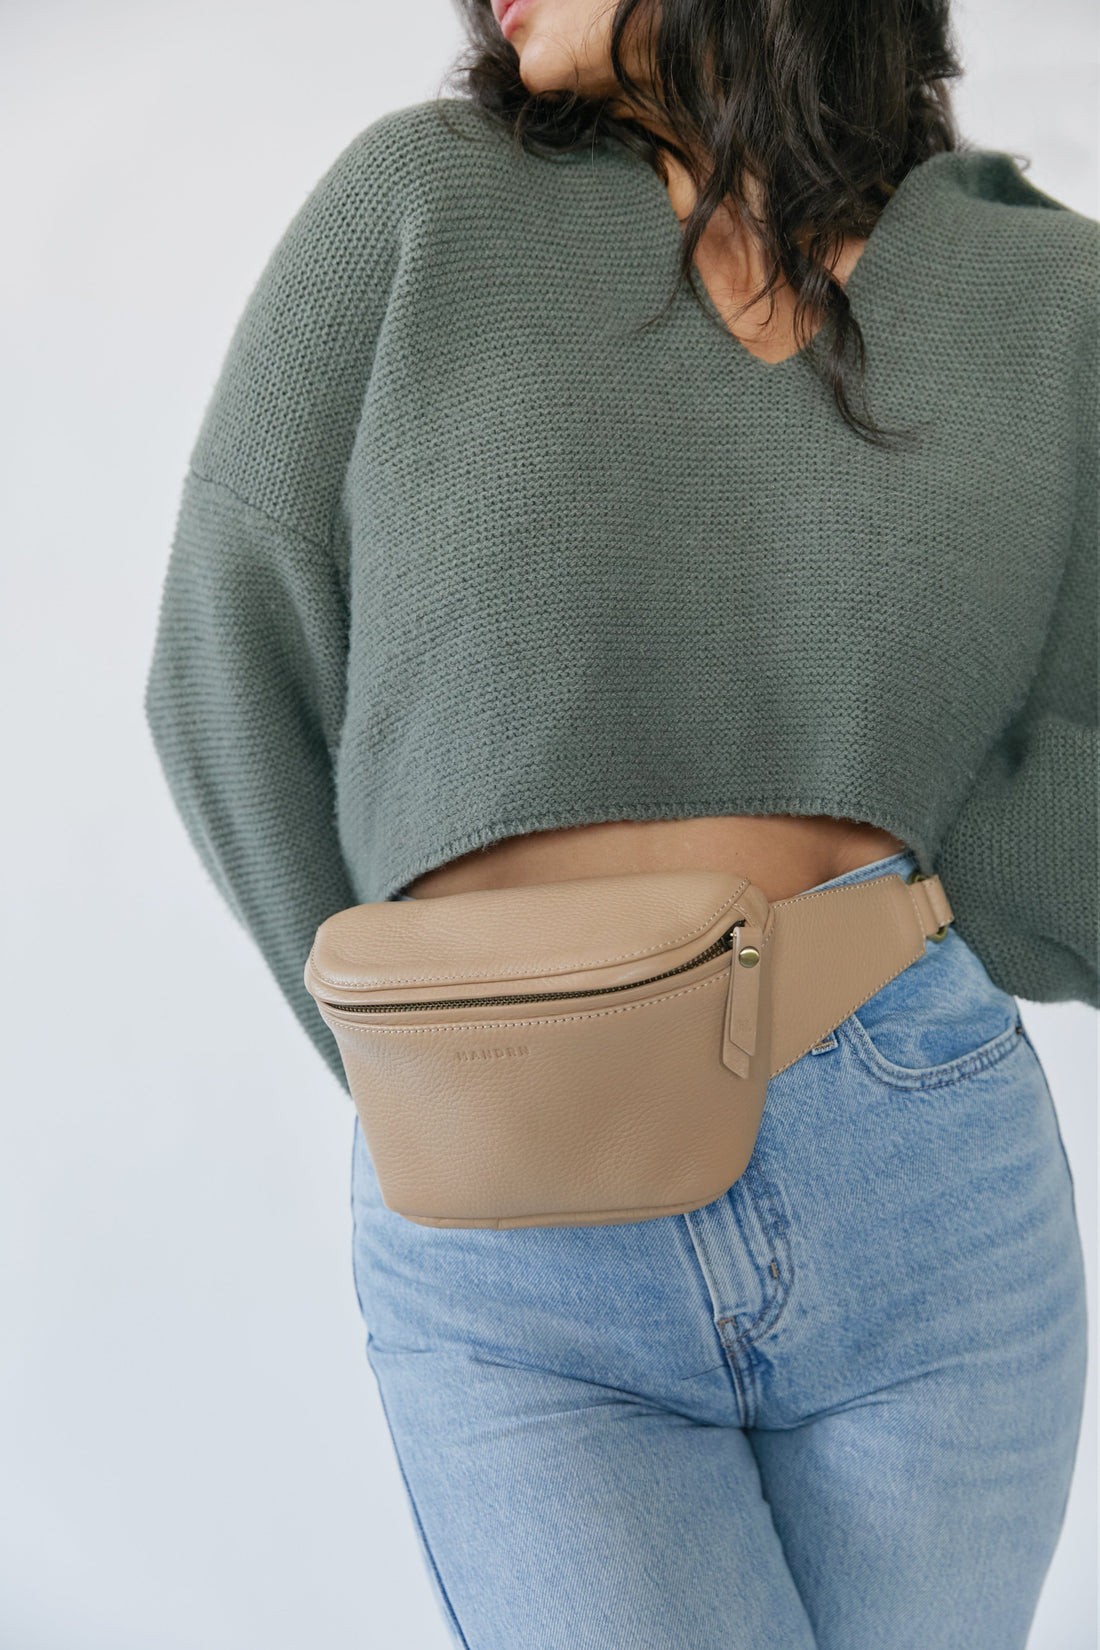 MANDRN  Genuine Leather Fanny Packs for the Modern You